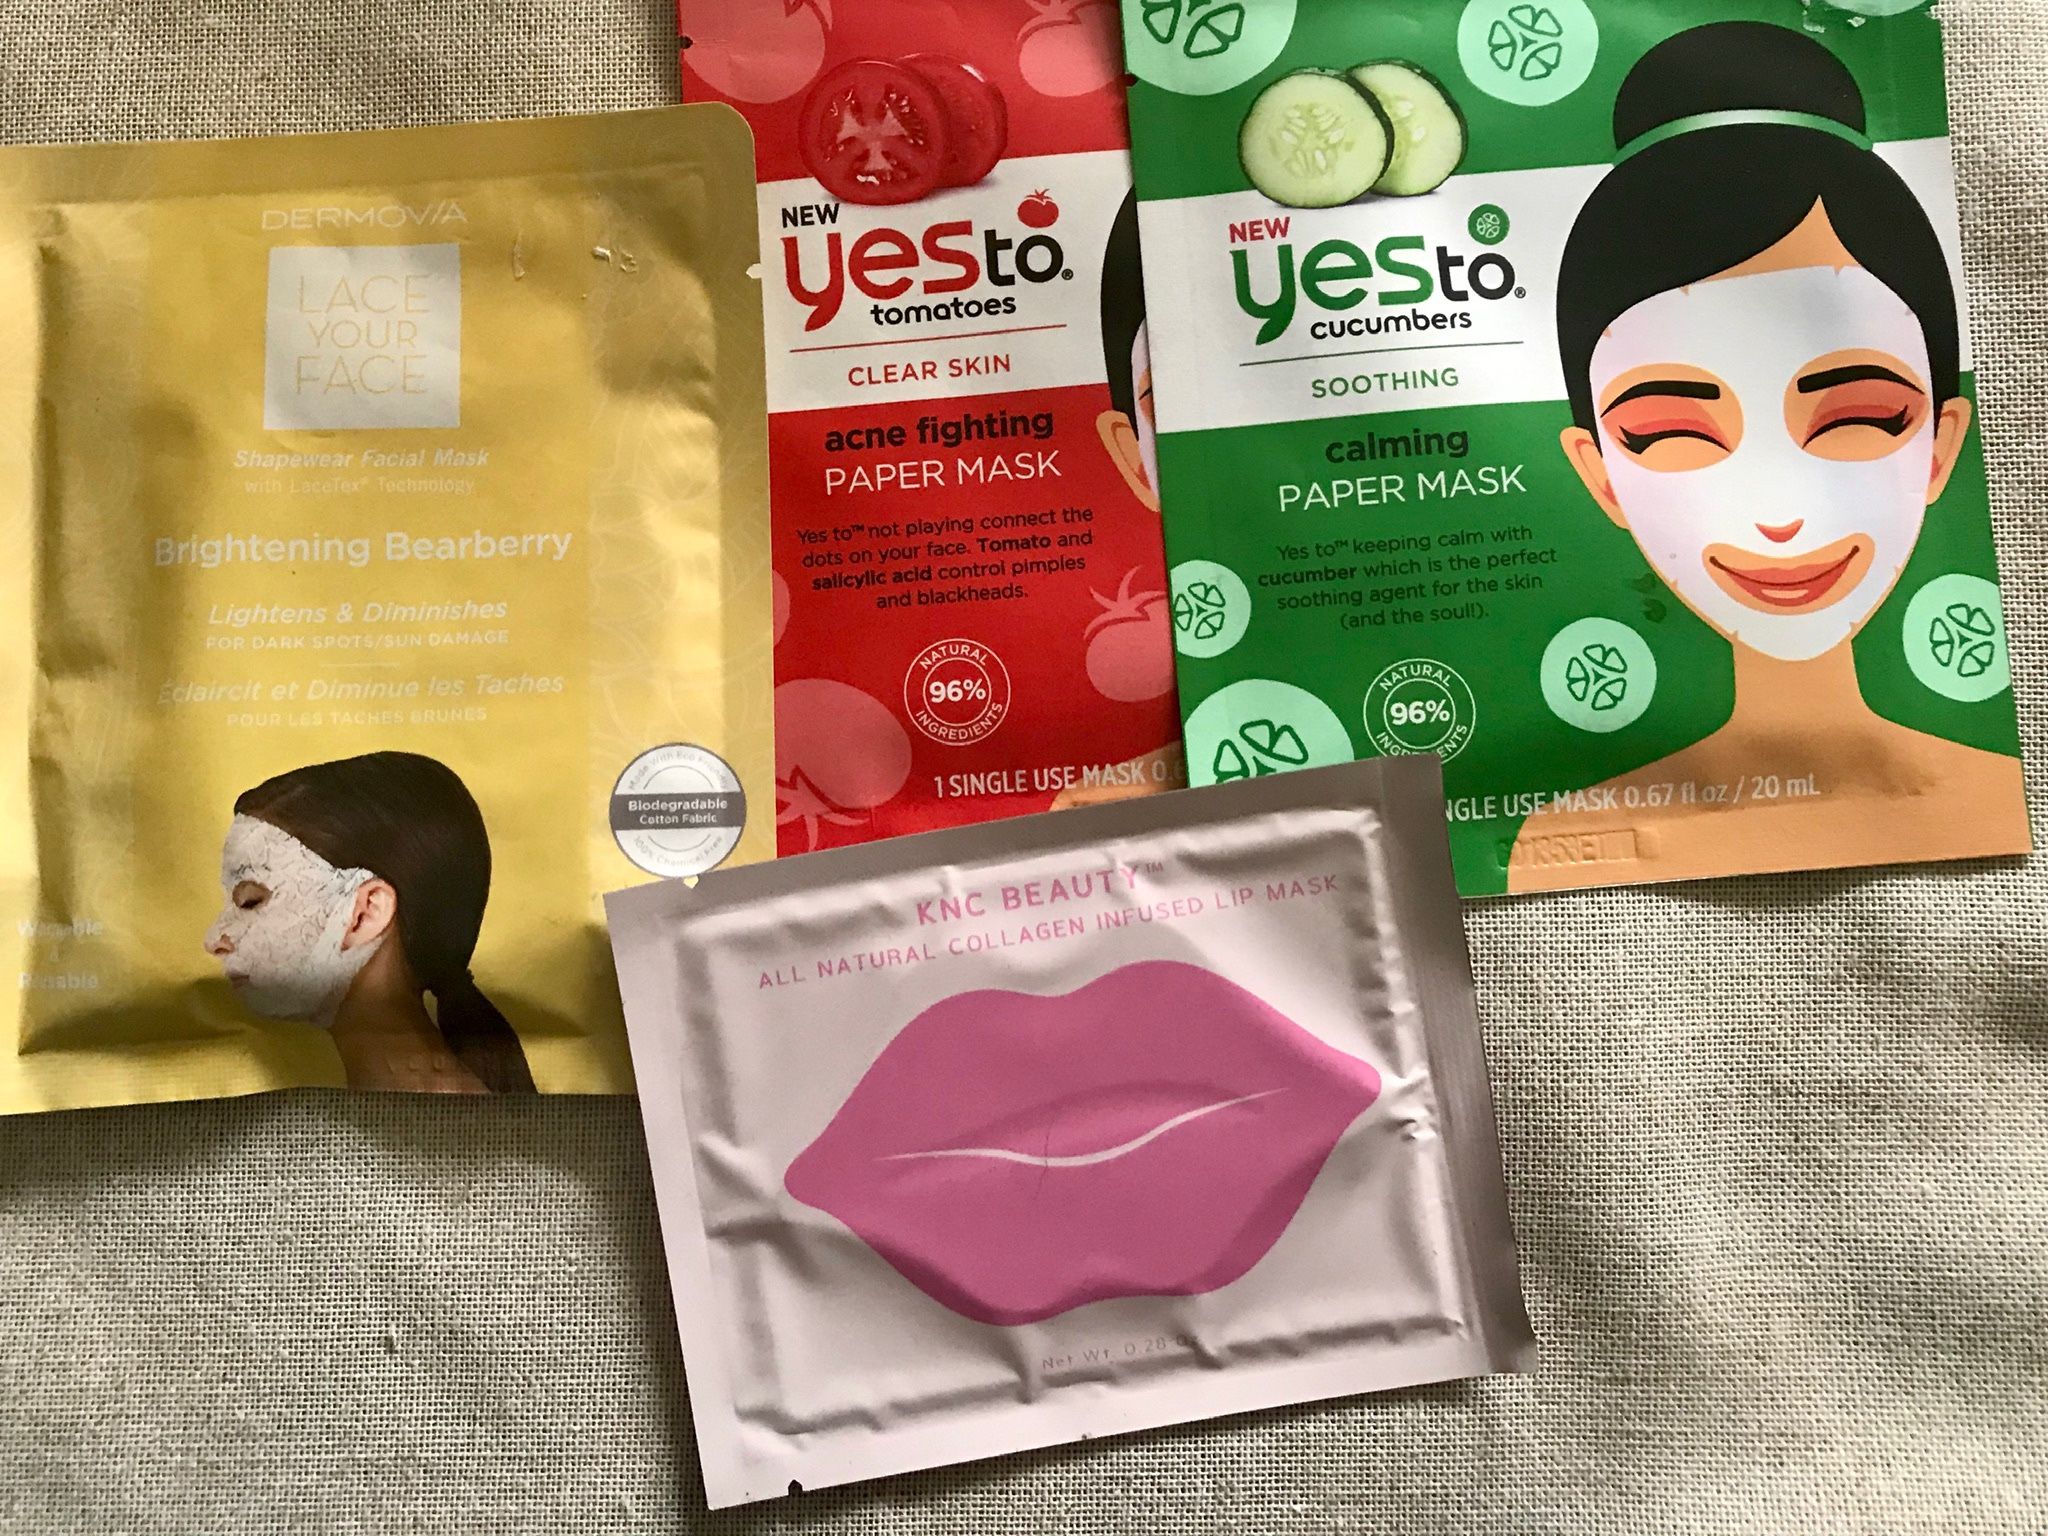 3 face masks and 1 lip mask NEW